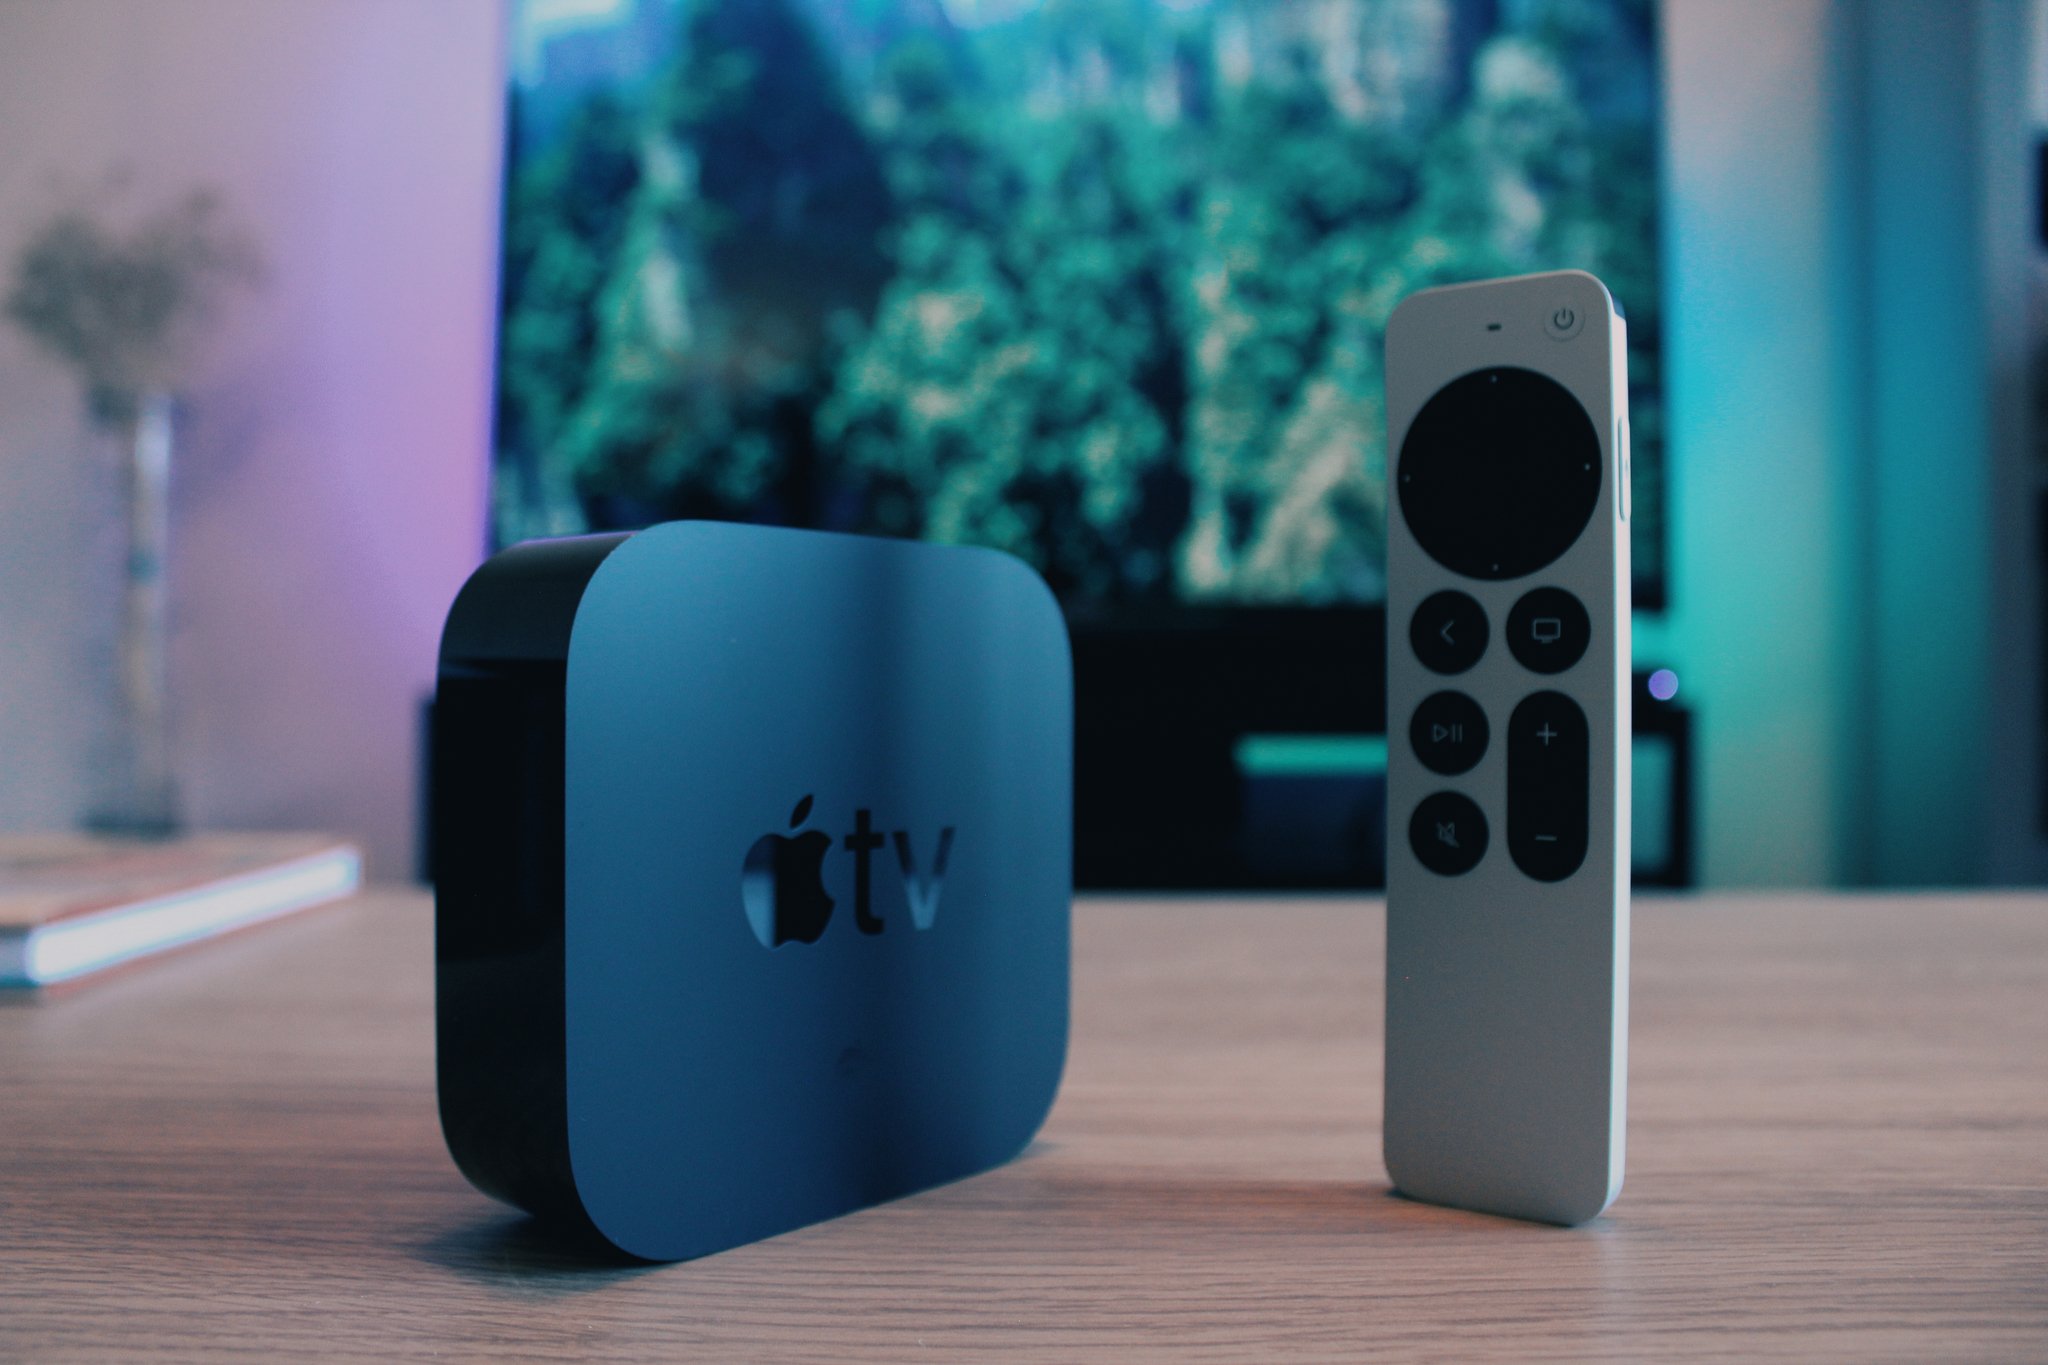 Apple TV 4K vs. Amazon Fire TV Stick 4K: Which should you buy? iMore